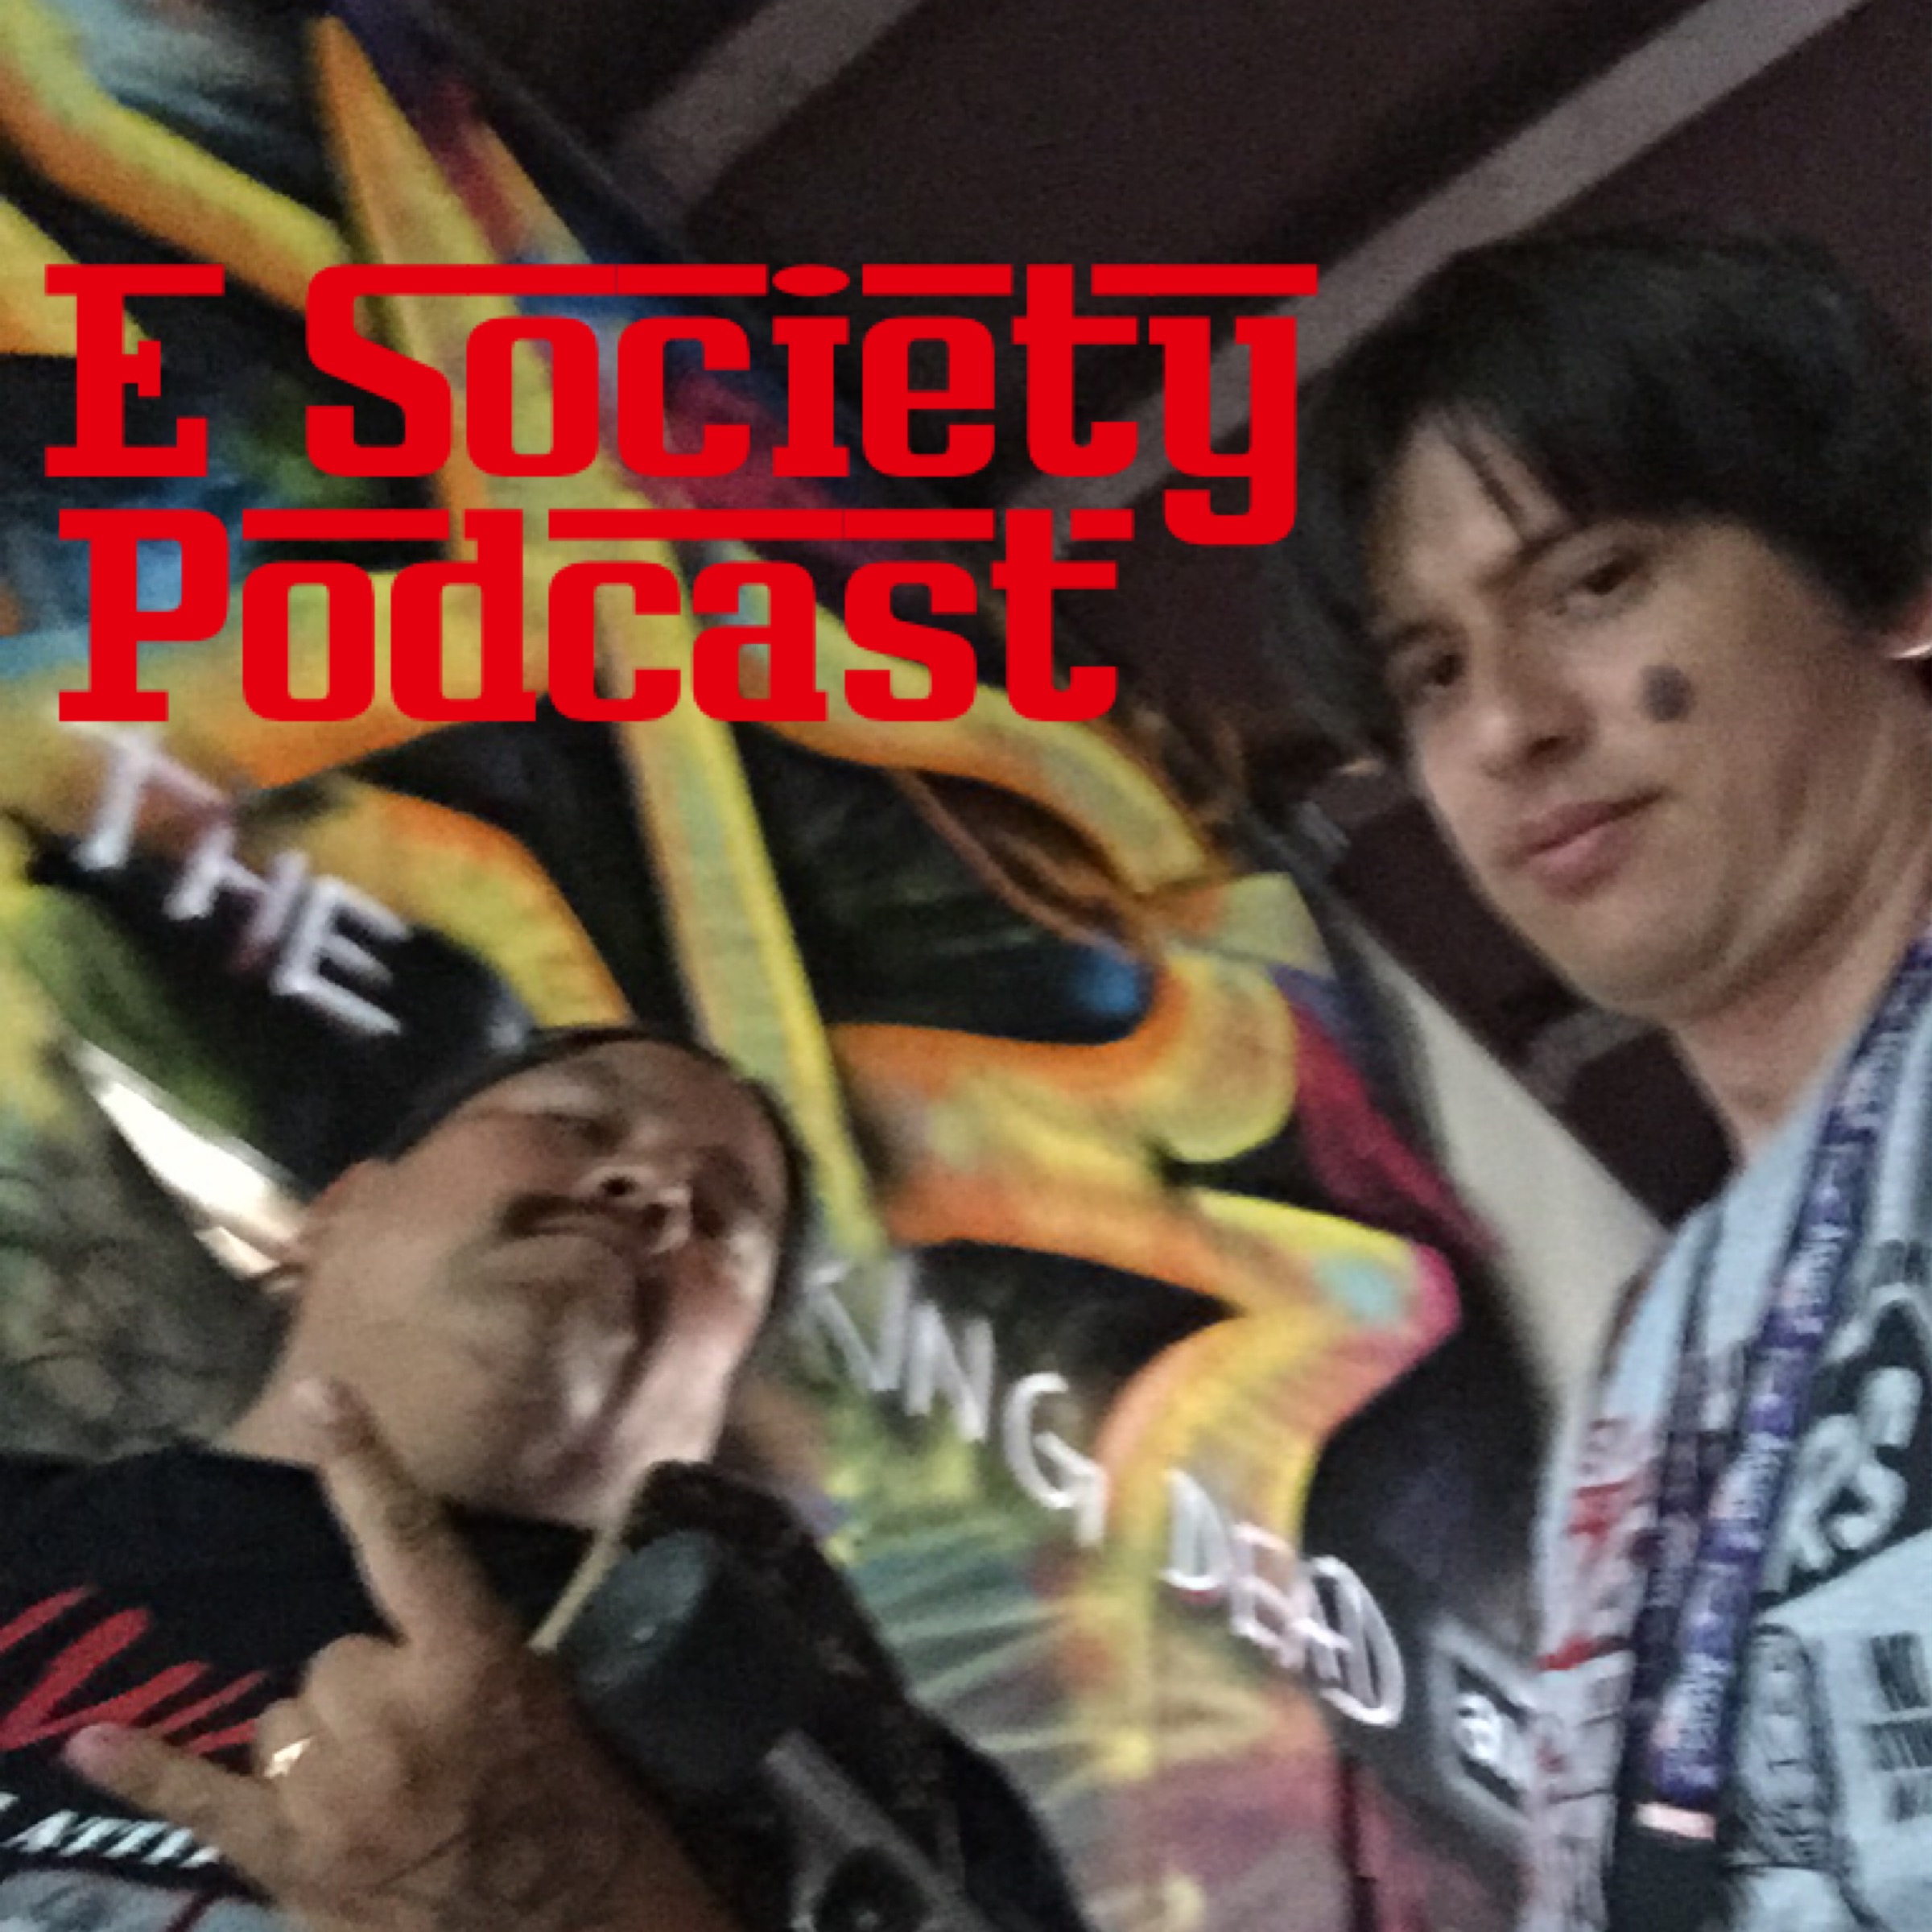 E Society Podcast - Ep. 92: You can't see me!